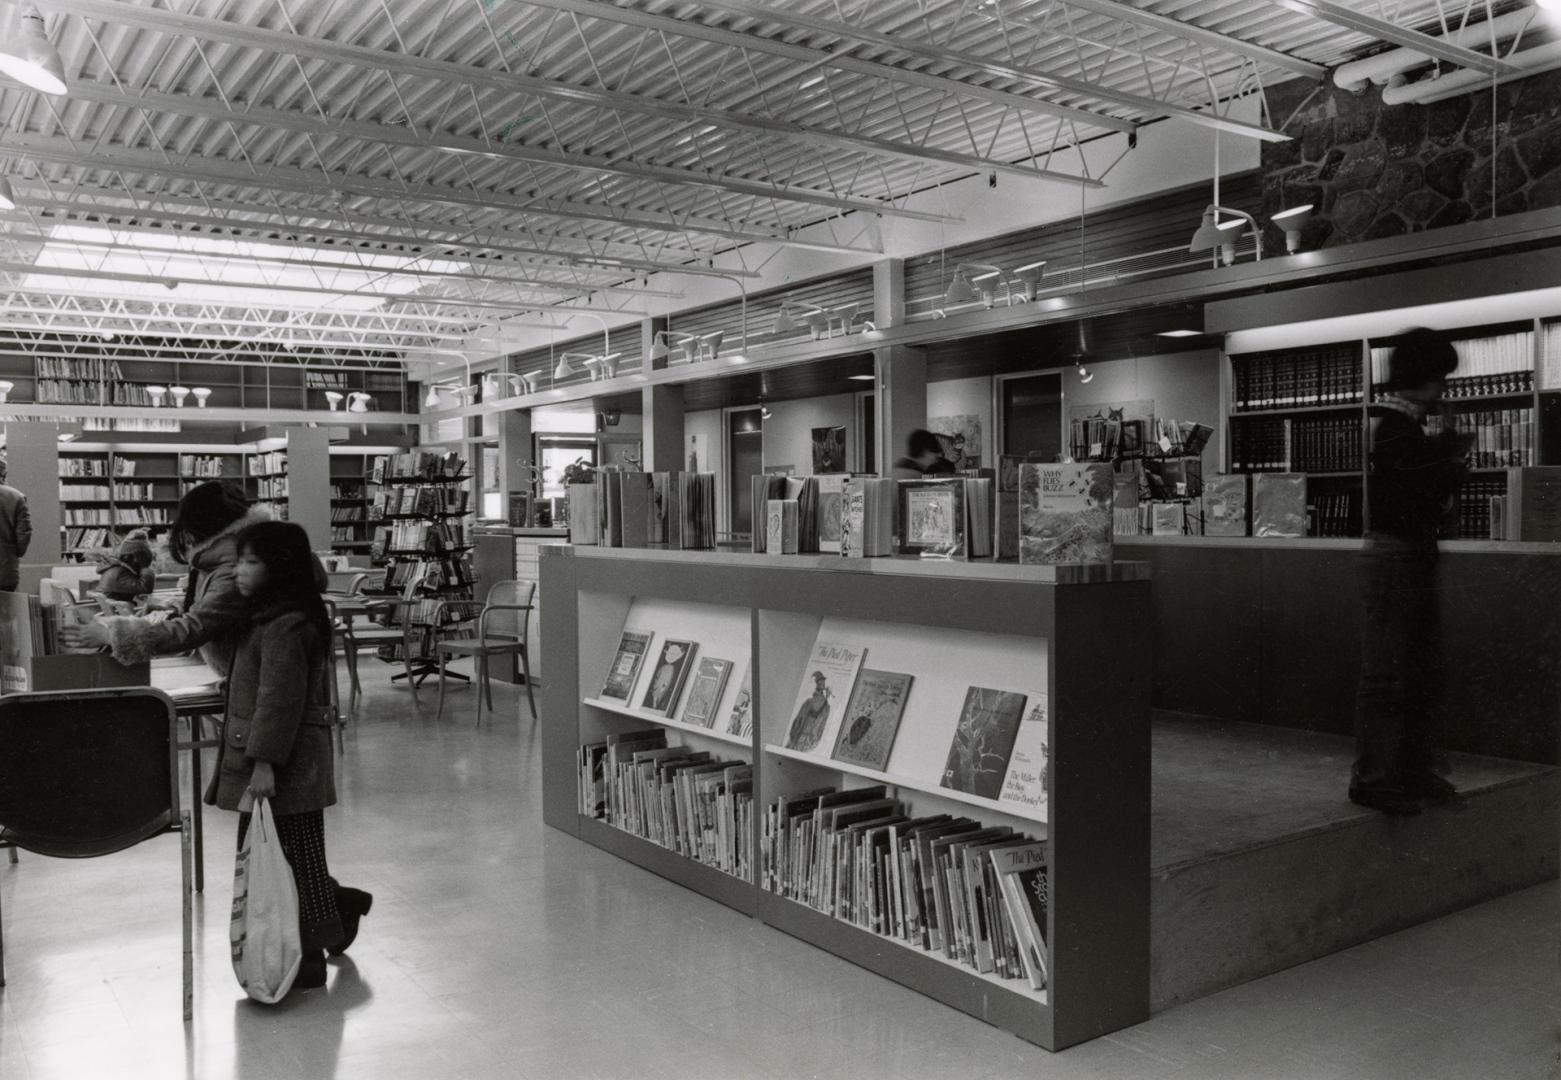 Picture of interior of library branch with shelves and people standing at desks. 